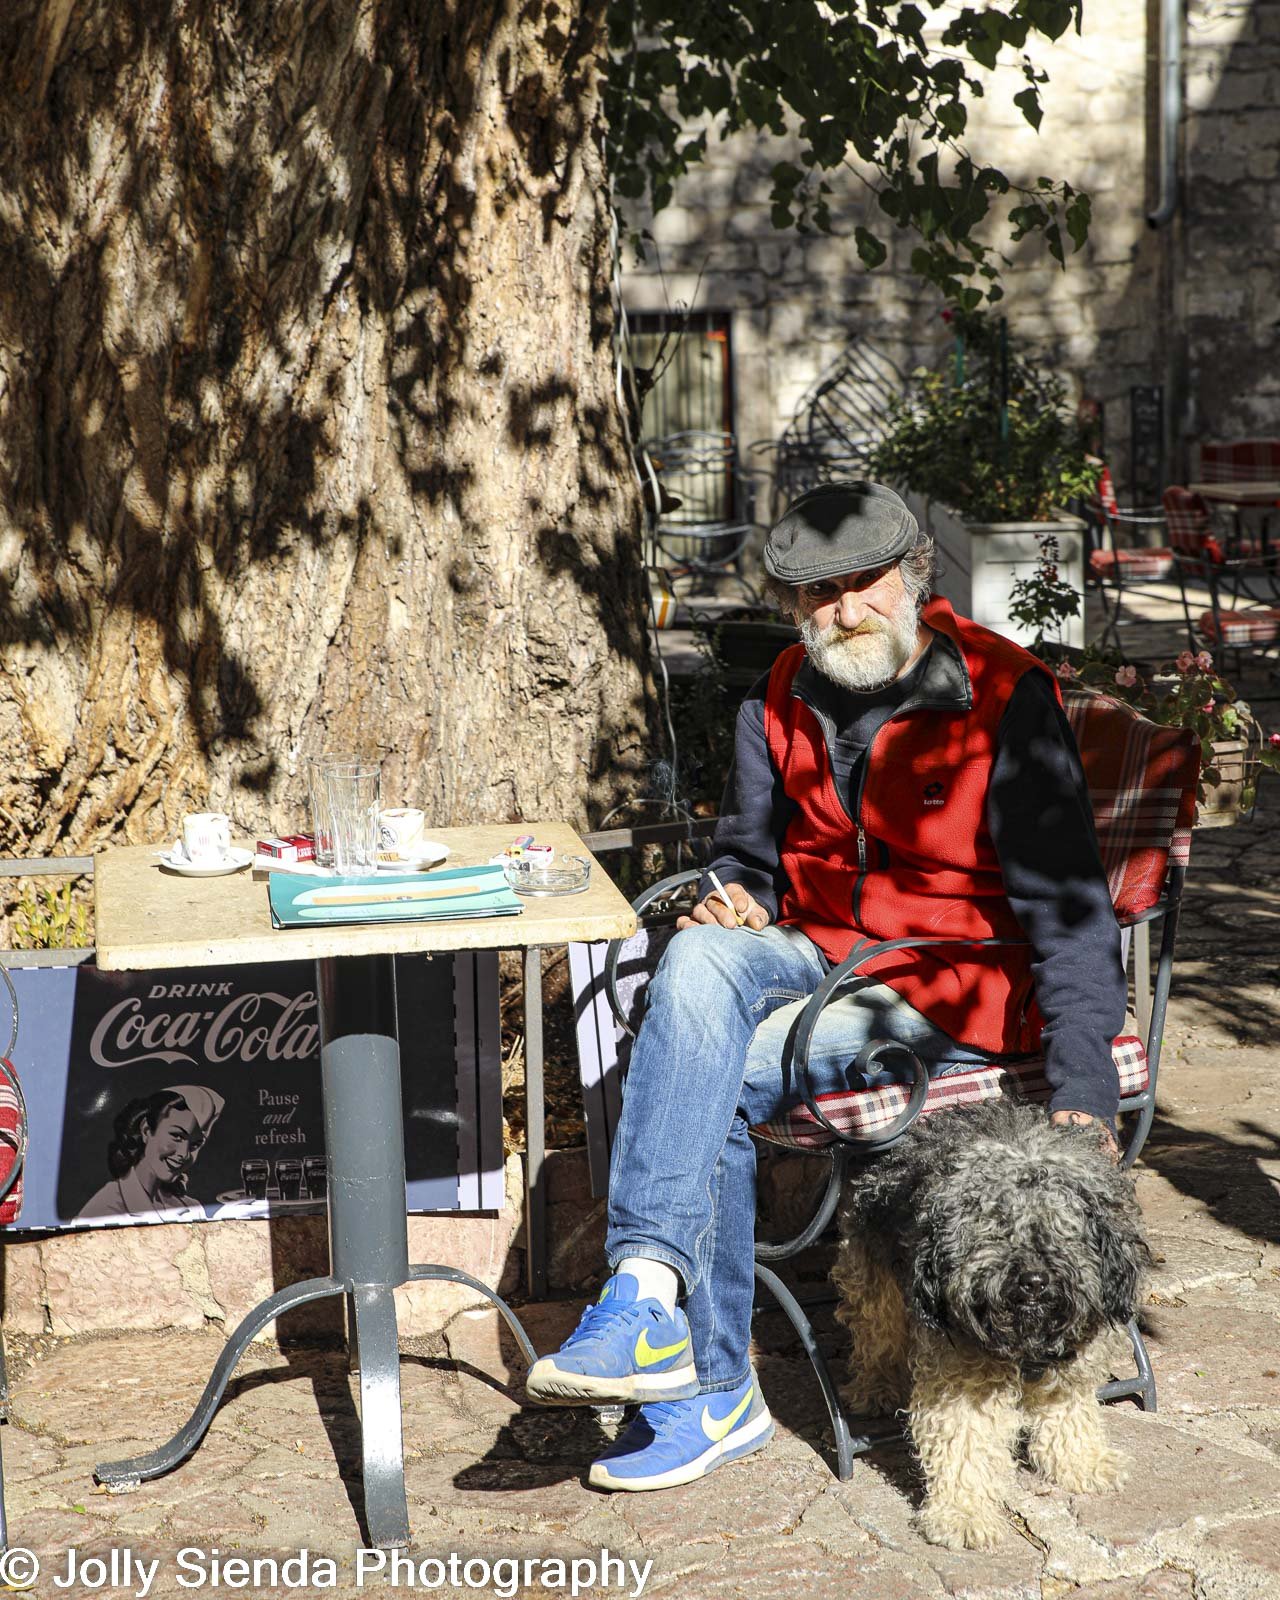 Man and his dog at an outdoor cafe in a park